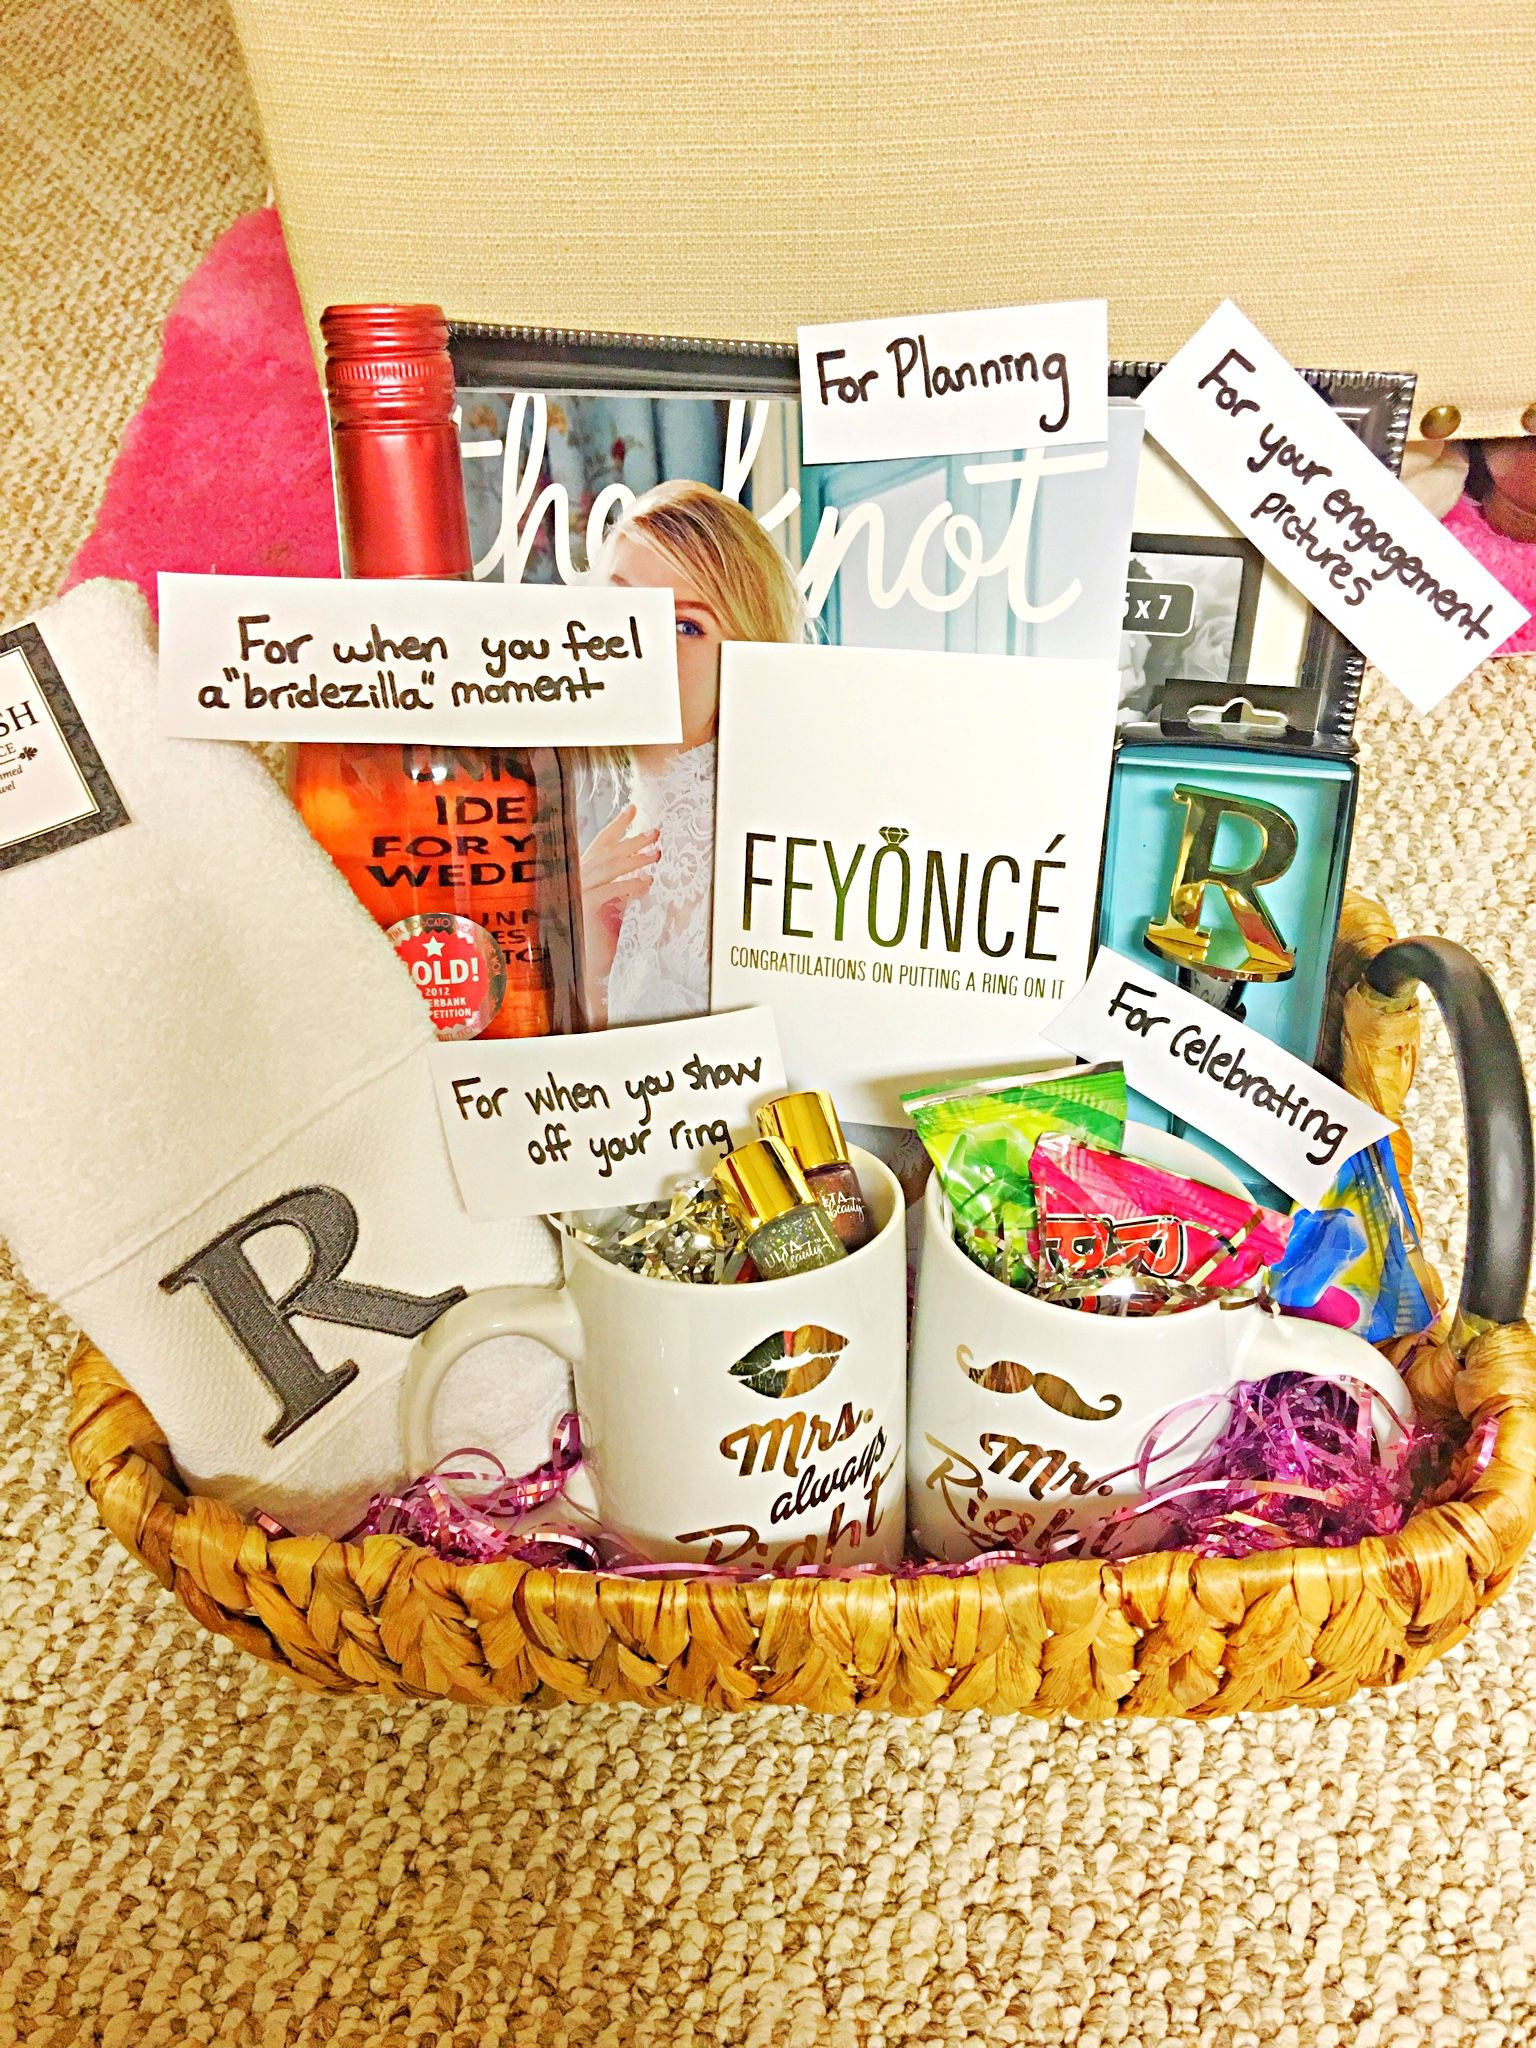 DIY Engagement Gifts
 DIY t basket for the future Mrs bride to be This is a